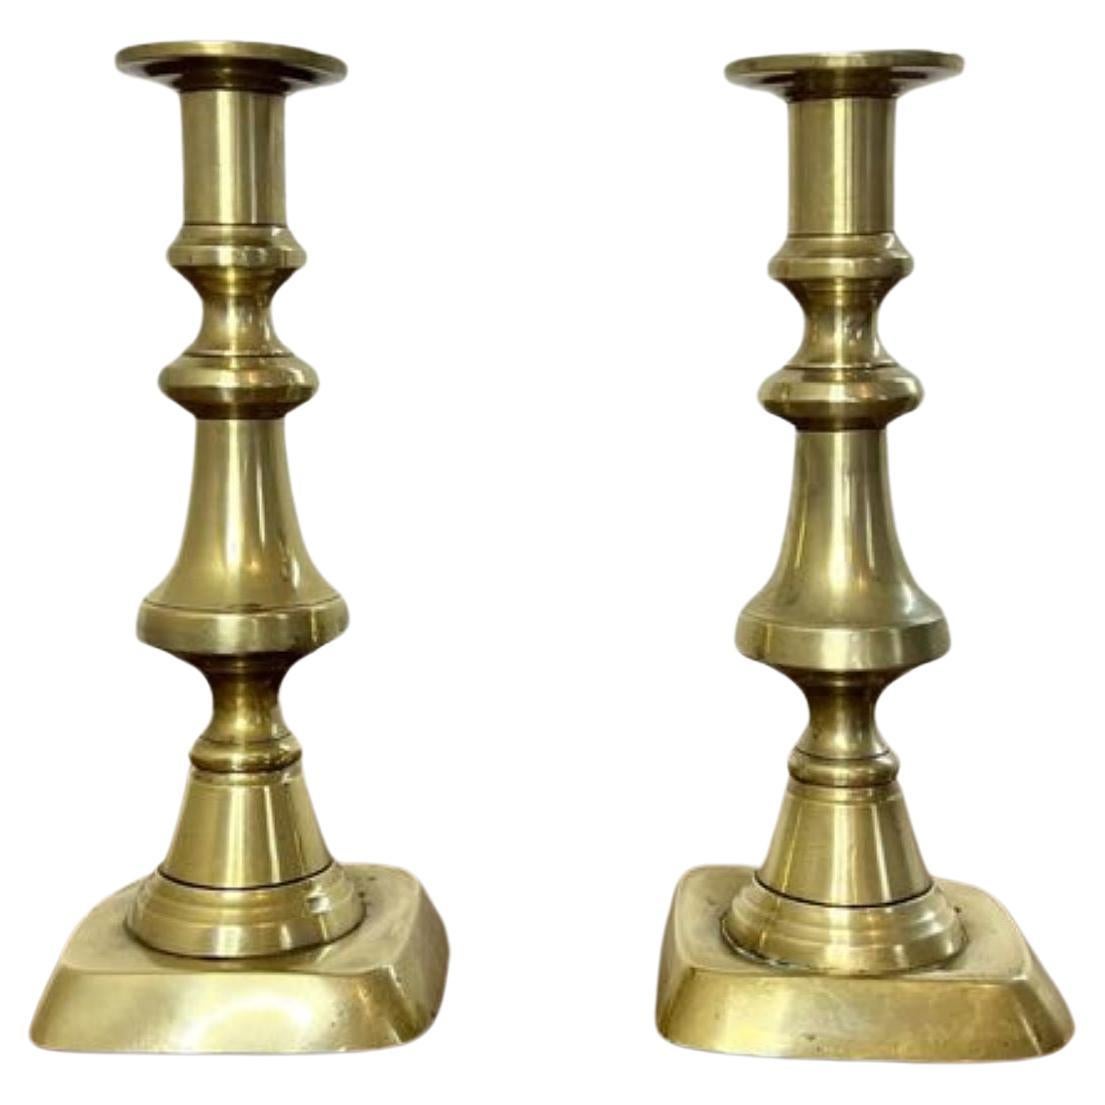 Quality pair of antique Victorian brass candlesticks For Sale